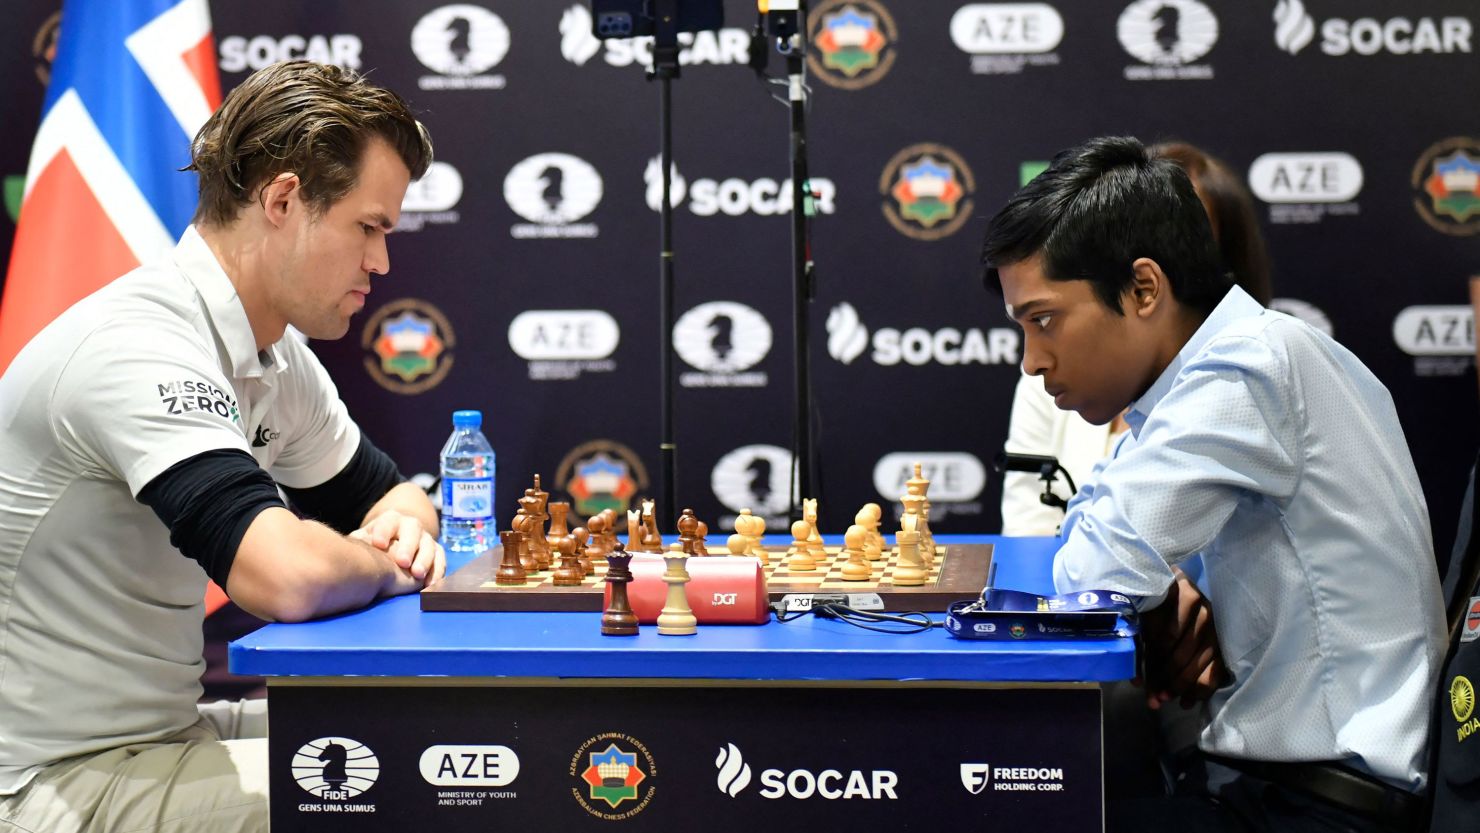 India's Rameshbabu Praggnanandhaa (R) competes against Norway's Magnus Carlsen (L) during the final at the FIDE Chess World Cup in Baku on August 24, 2023. (Photo by Tofik BABAYEV / AFP) (Photo by TOFIK BABAYEV/AFP via Getty Images)